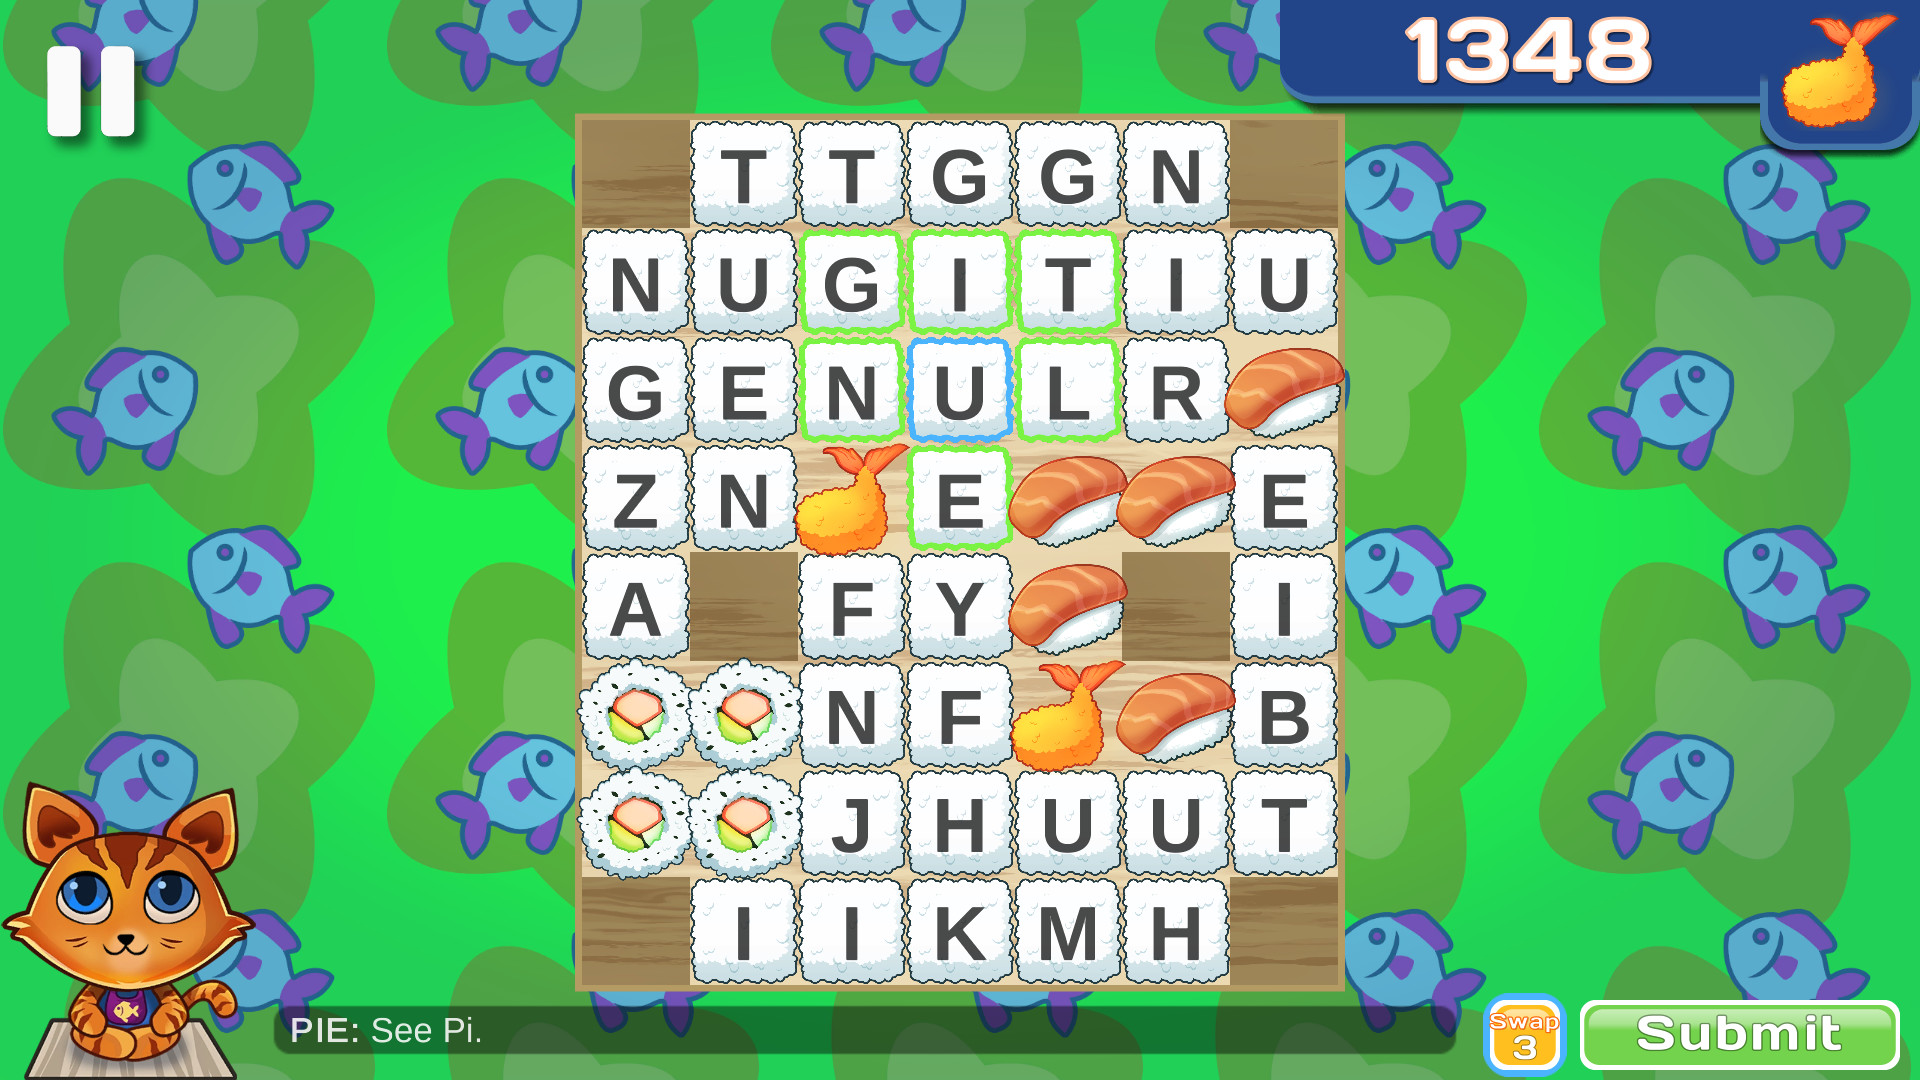 Игра слово вин. Eat your Words. Eating your Words картинка. Игра слов. Word Puzzles and games.